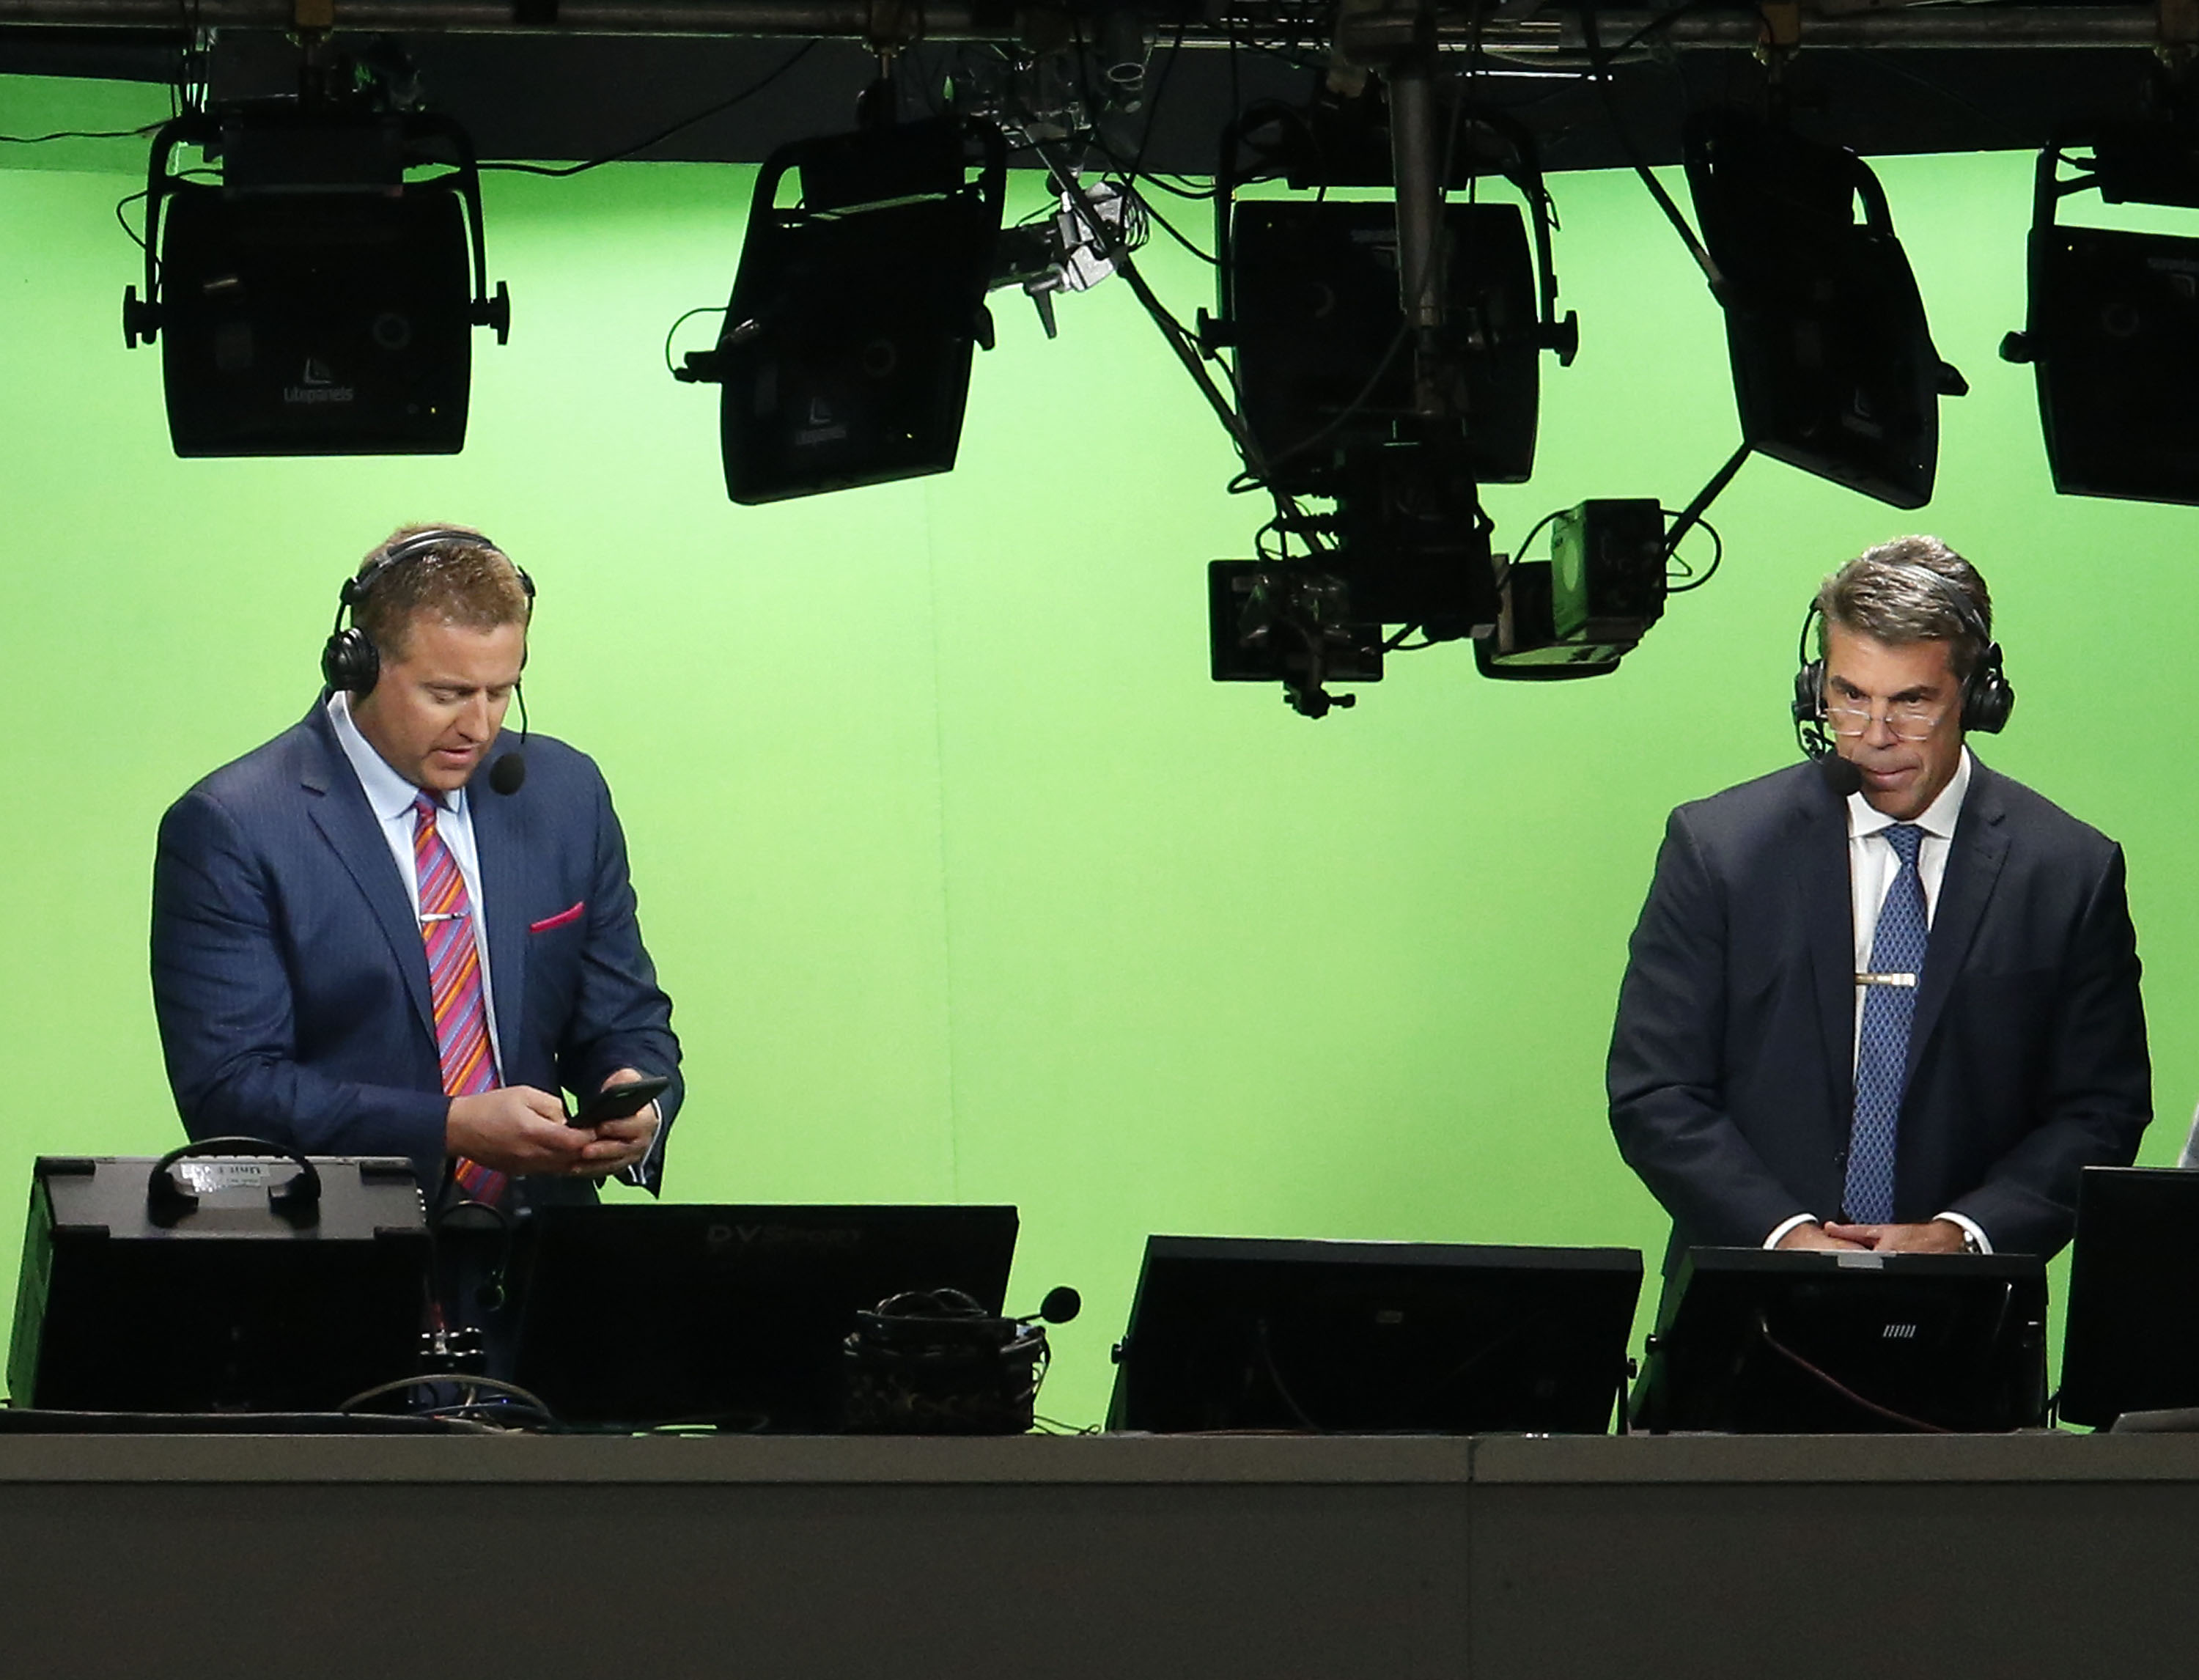 ESPN television personalities Kirk Herbstreit and Chris Fowler prepare for the College Football Playoff National Championship game between the Georgia Bulldogs and the Alabama Crimson Tide at Mercedes-Benz Stadium on January 8, 2018 in Atlanta, Georgia.